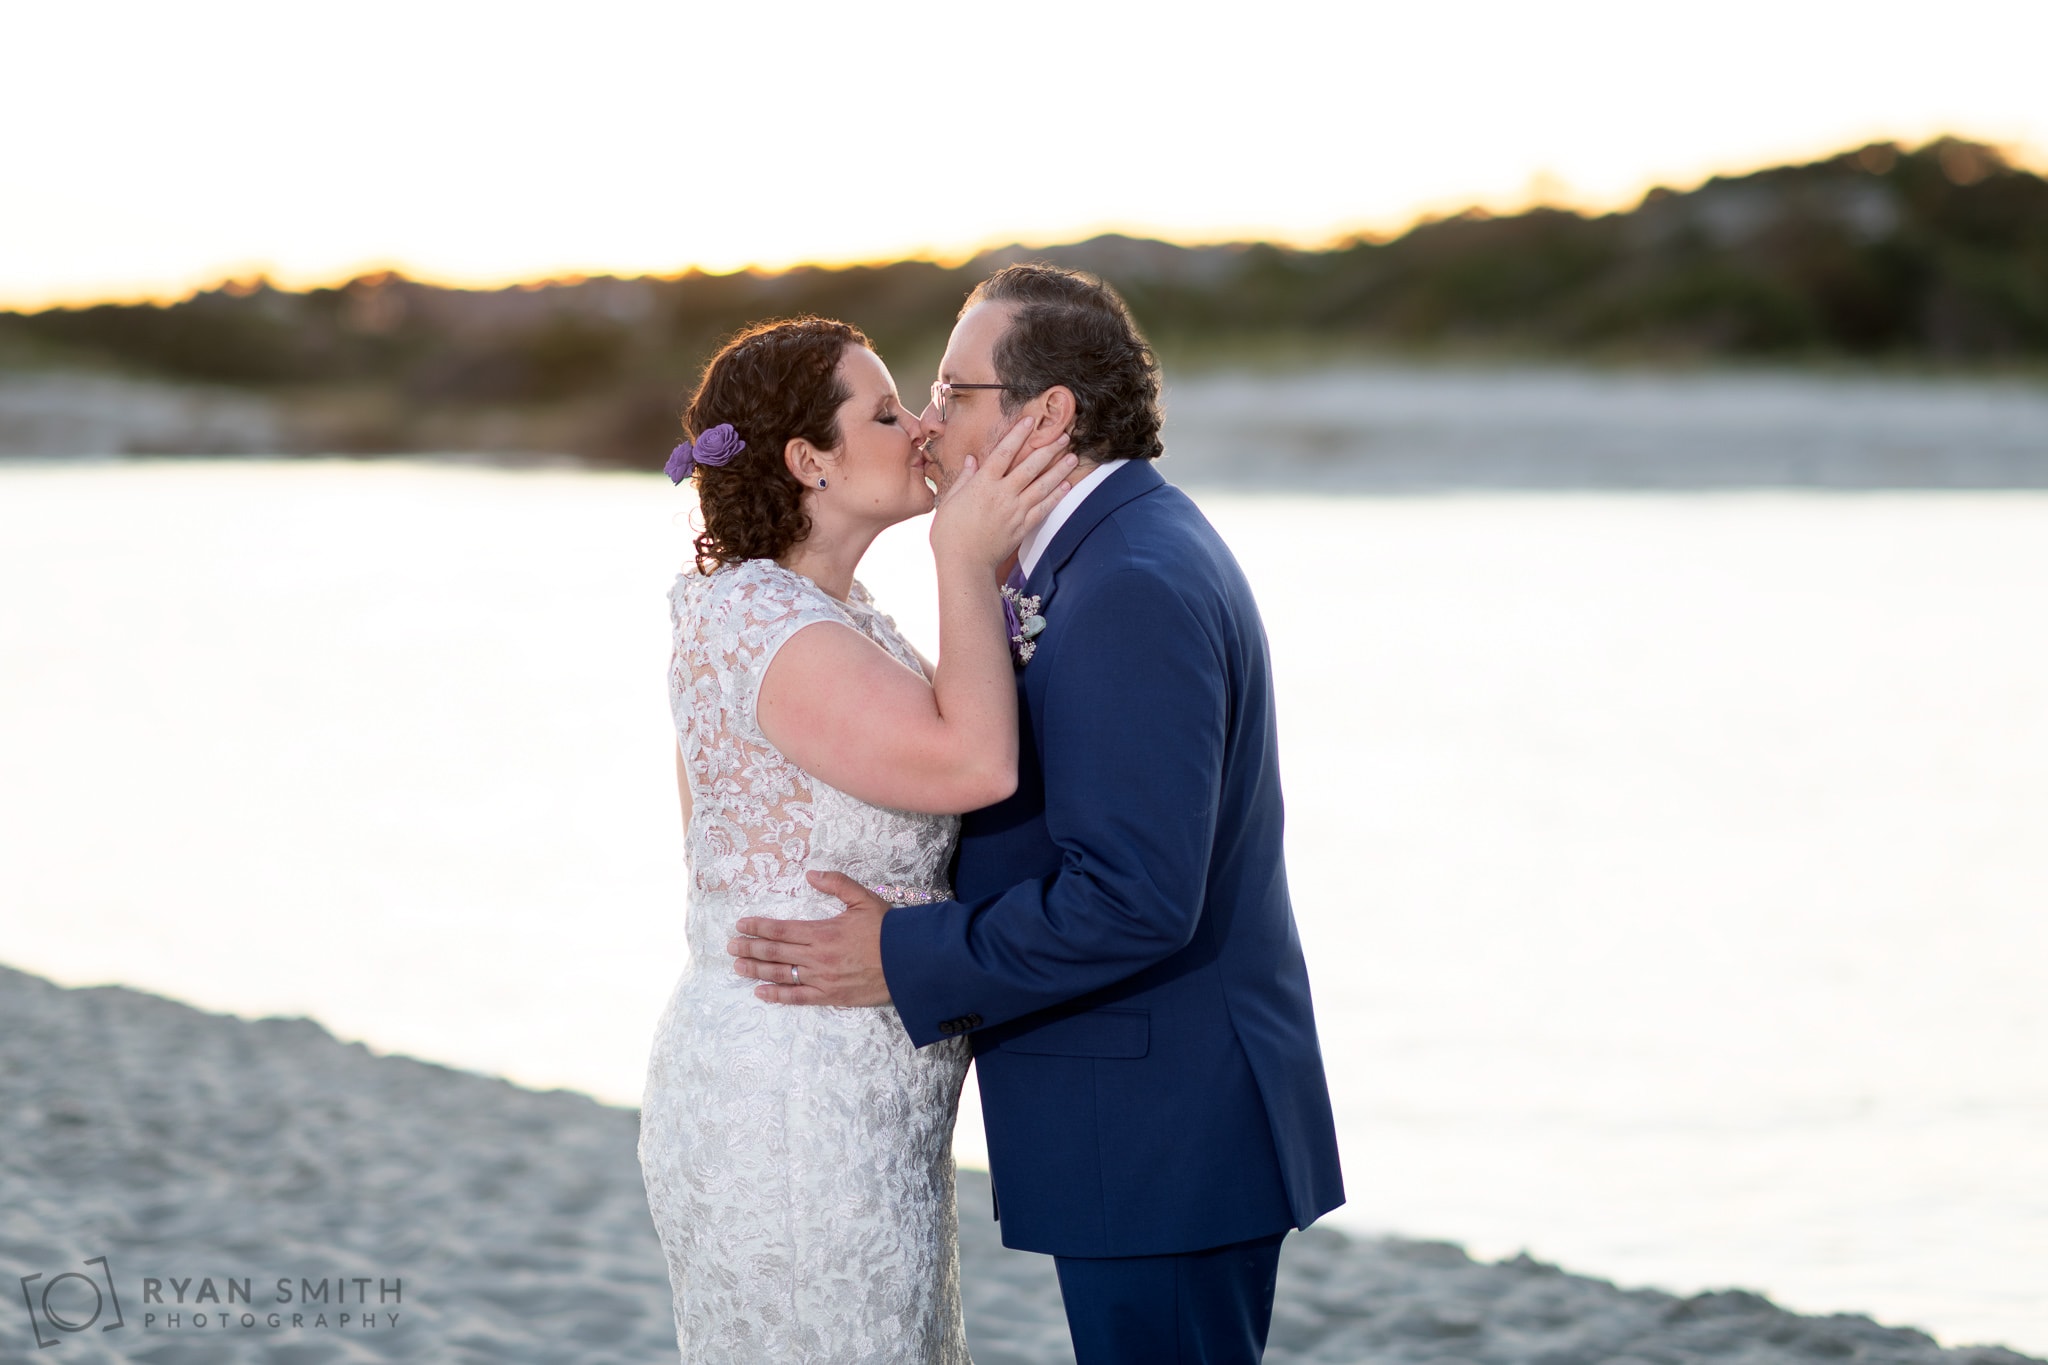 Pulling groom in for a kiss by the water - North Beach Plantation